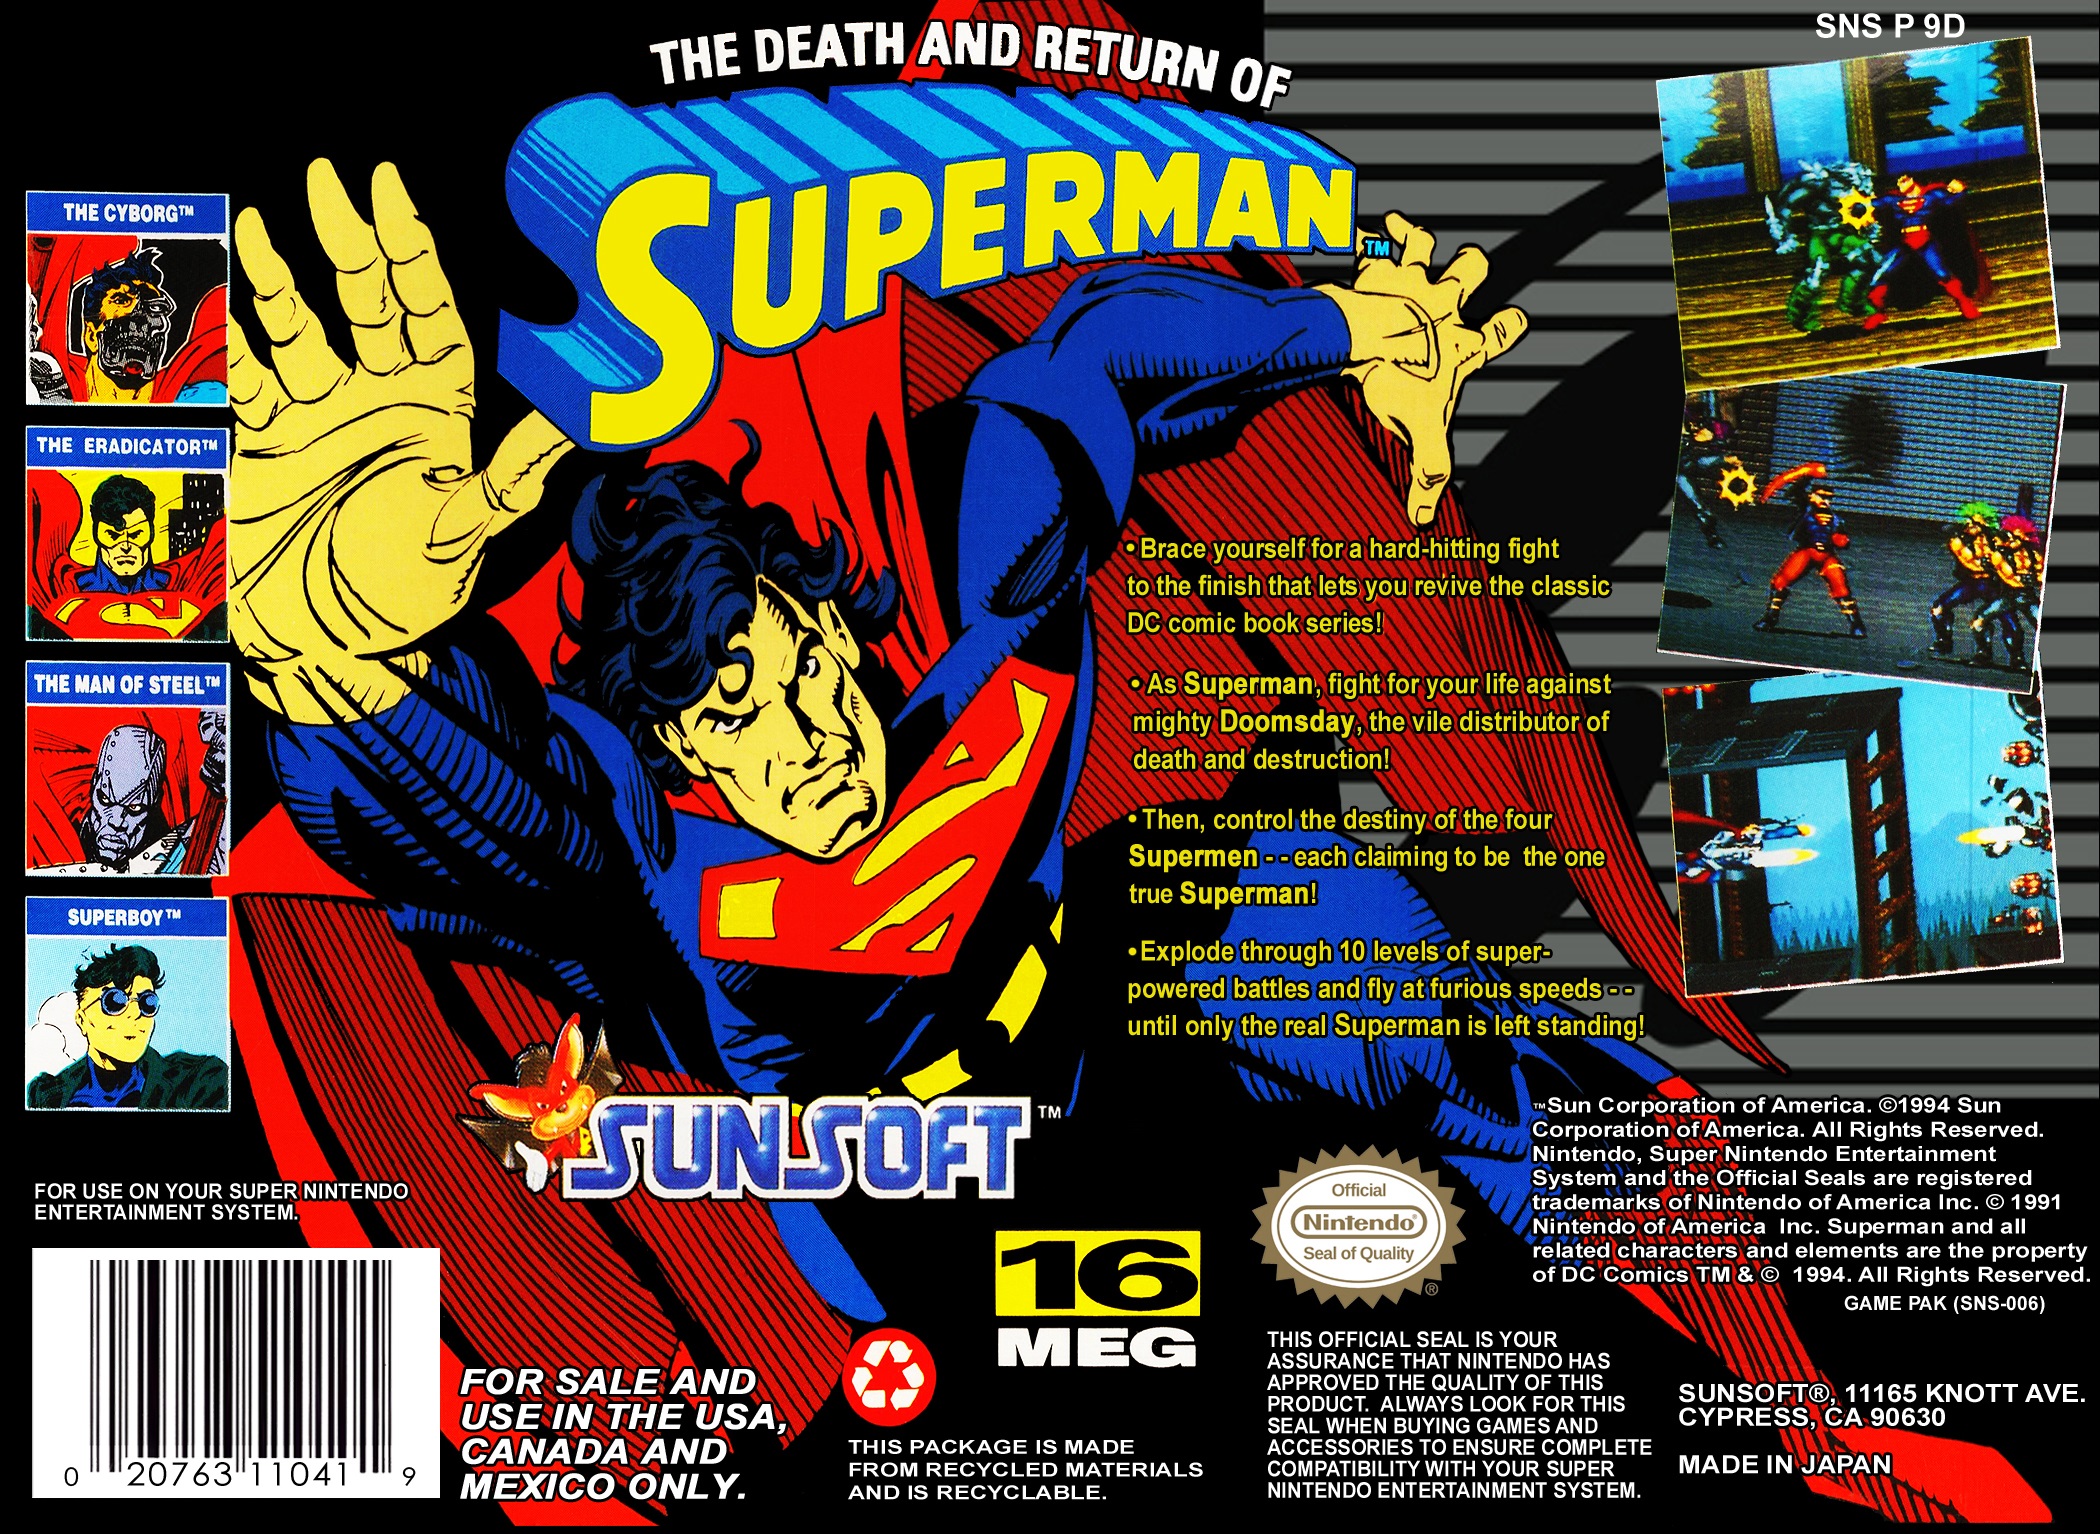 download the death and return of superman the complete film collection